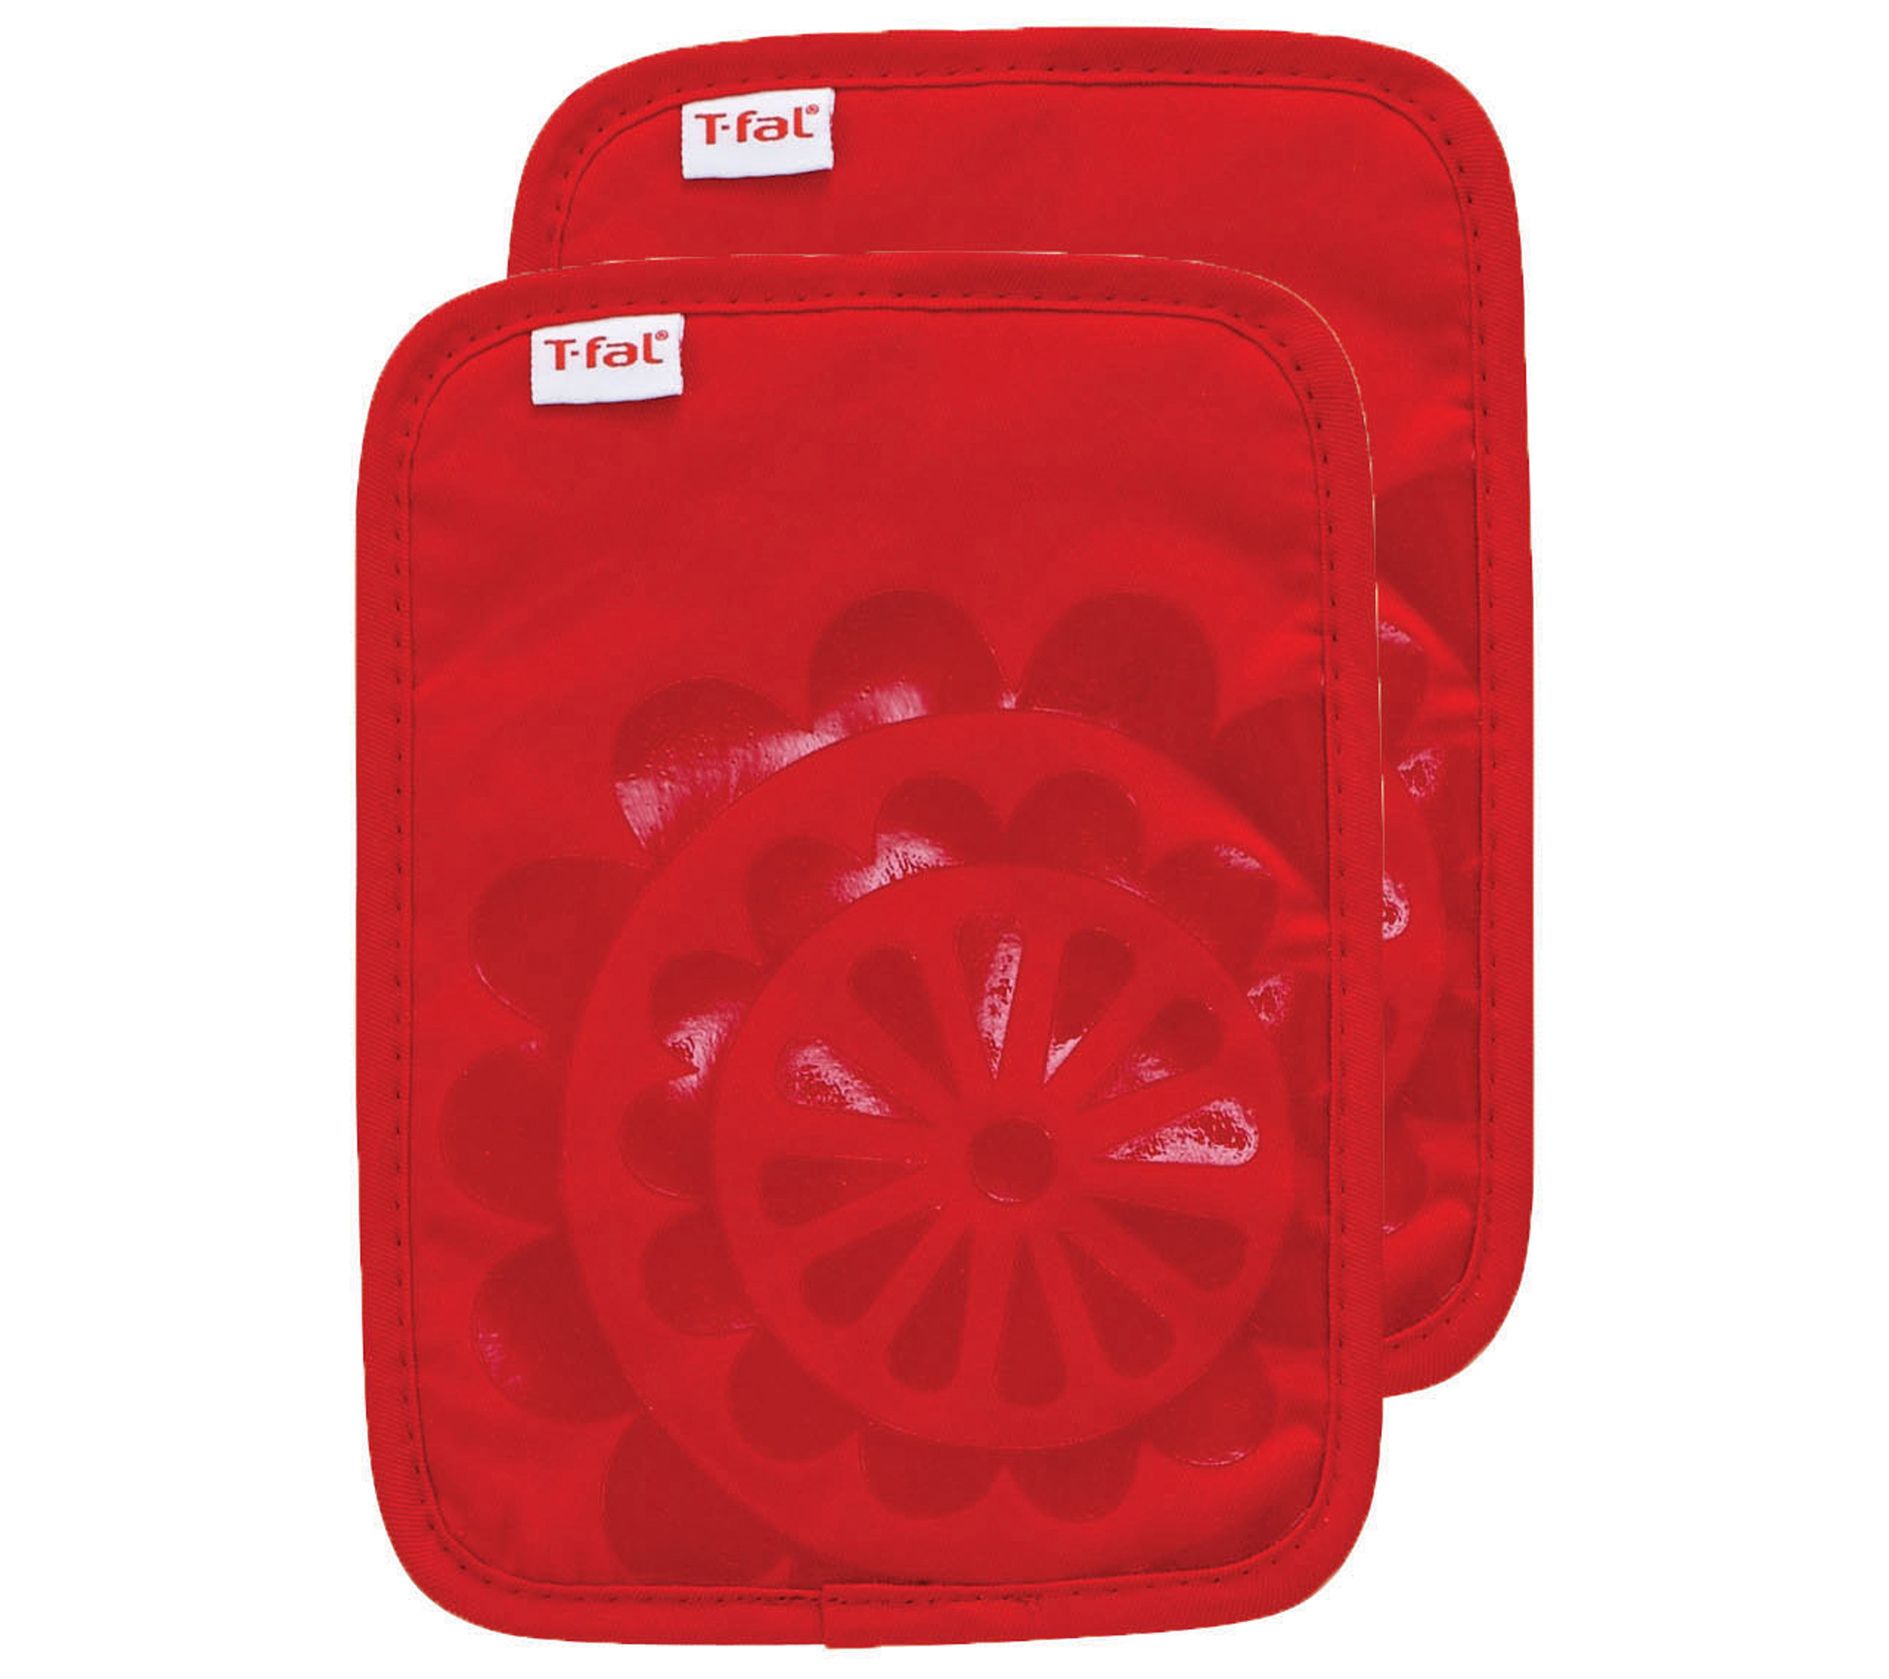 T-Fal Green Medallion Cotton Silicone Pot Holder (2-Pack)